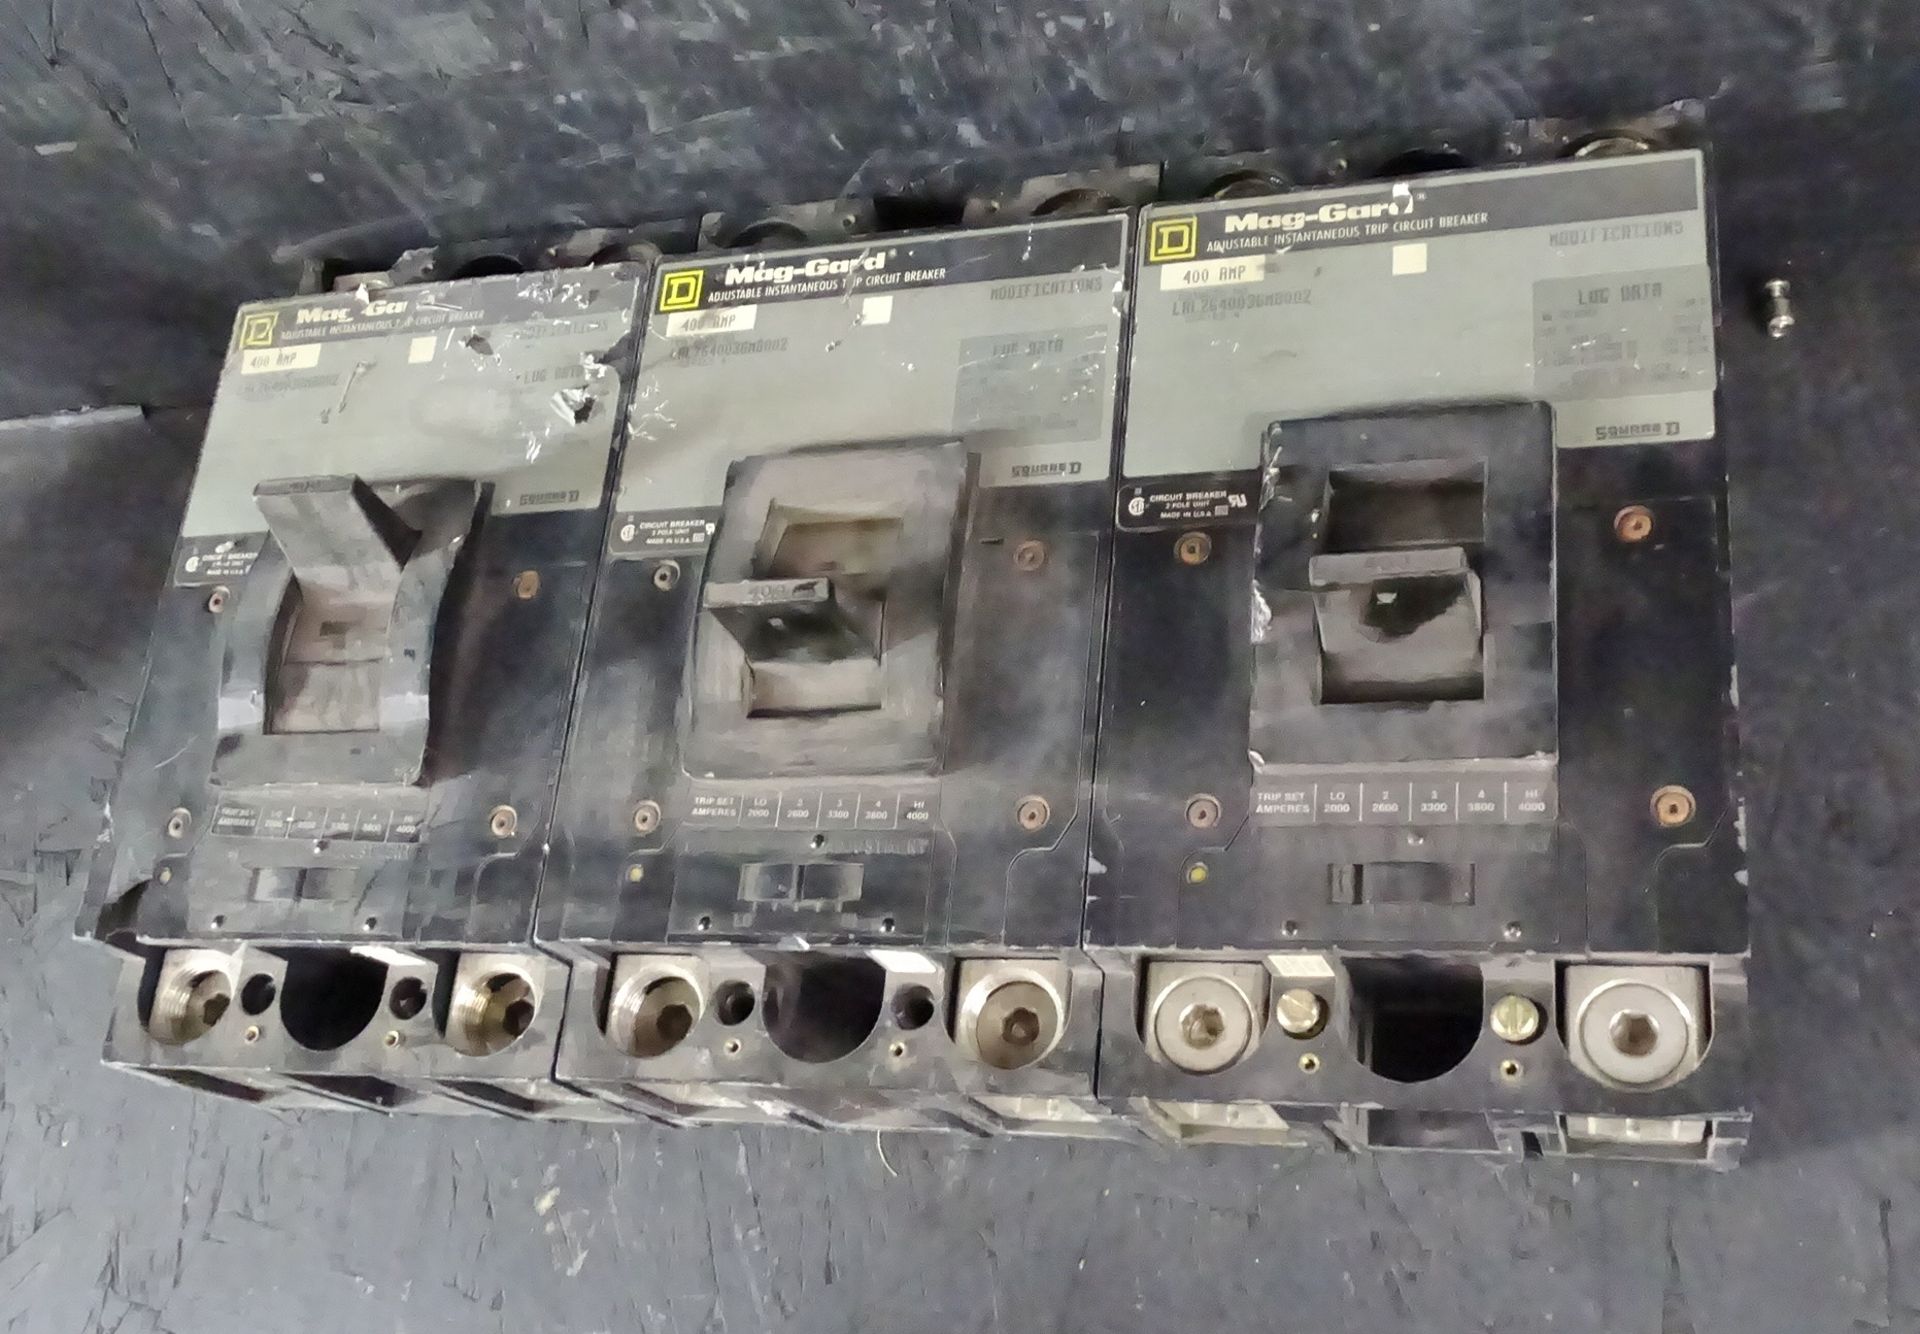 Square-D 400-Amp Series 4 Breaker Switches - Image 2 of 4